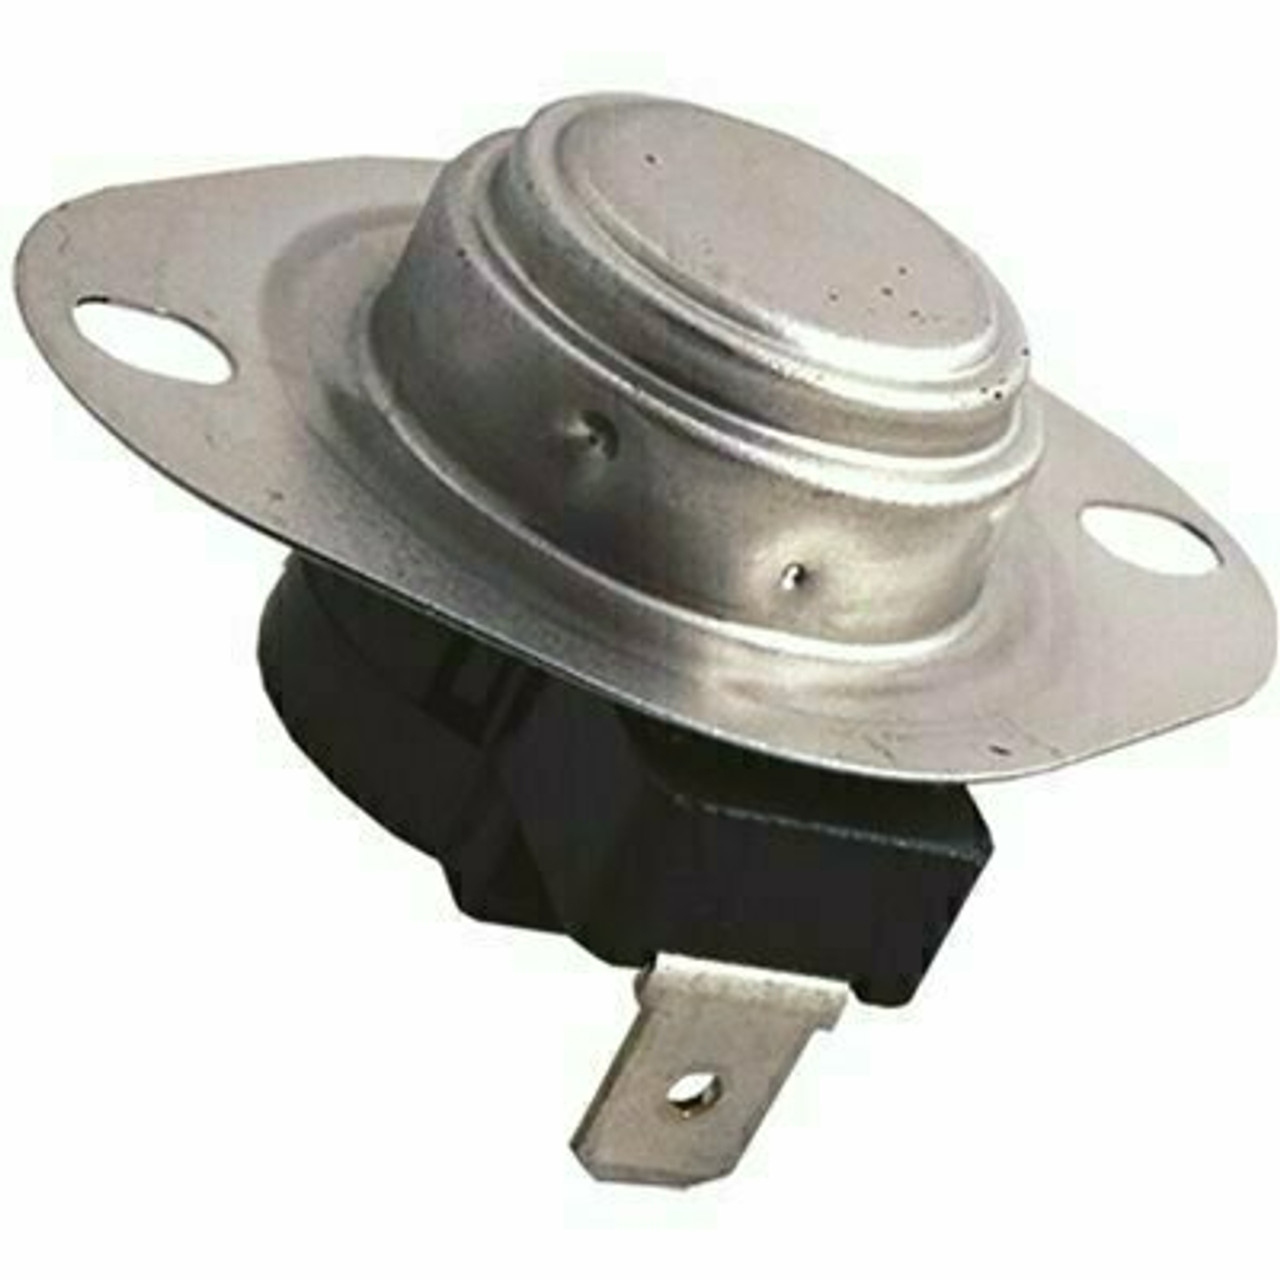 Supco Clothes Dryer Control Thermostat For Whirlpool